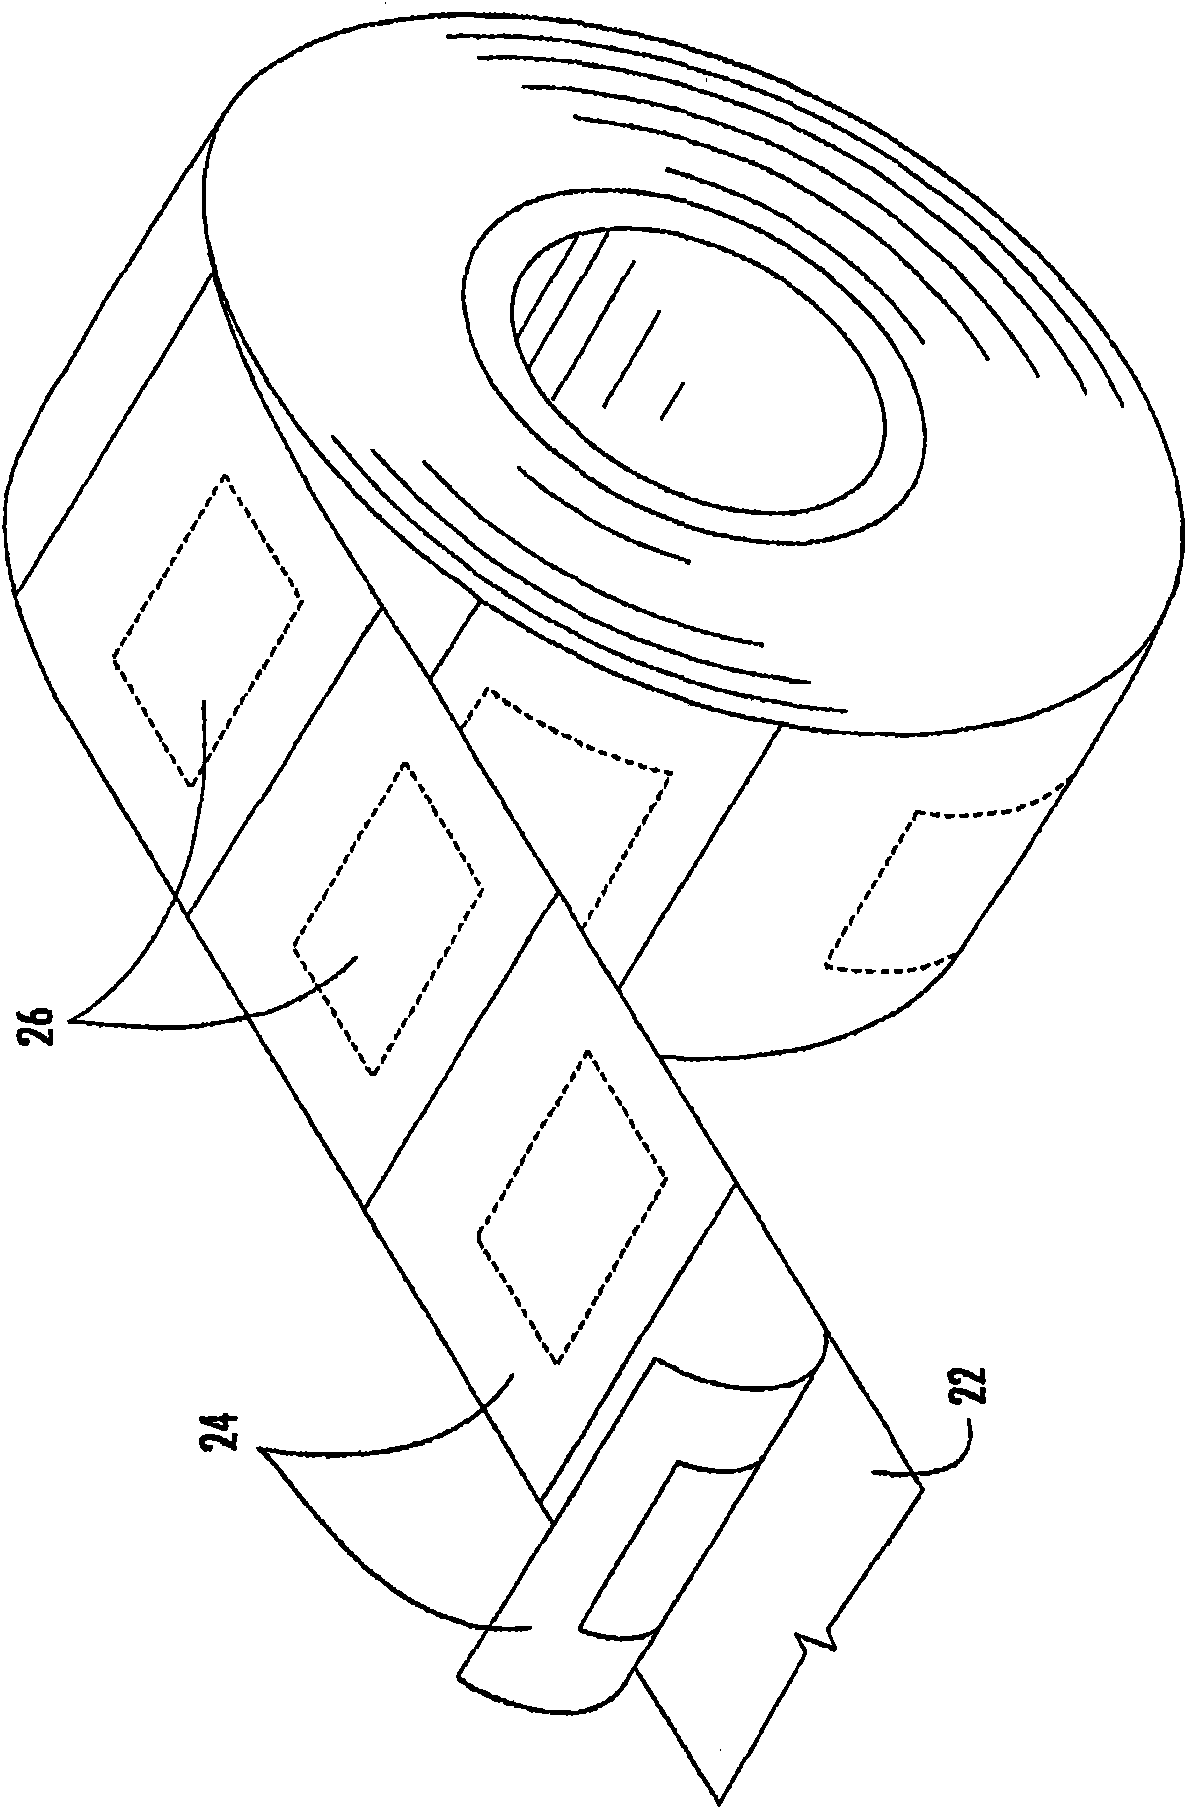 Media processing system and associated spindle